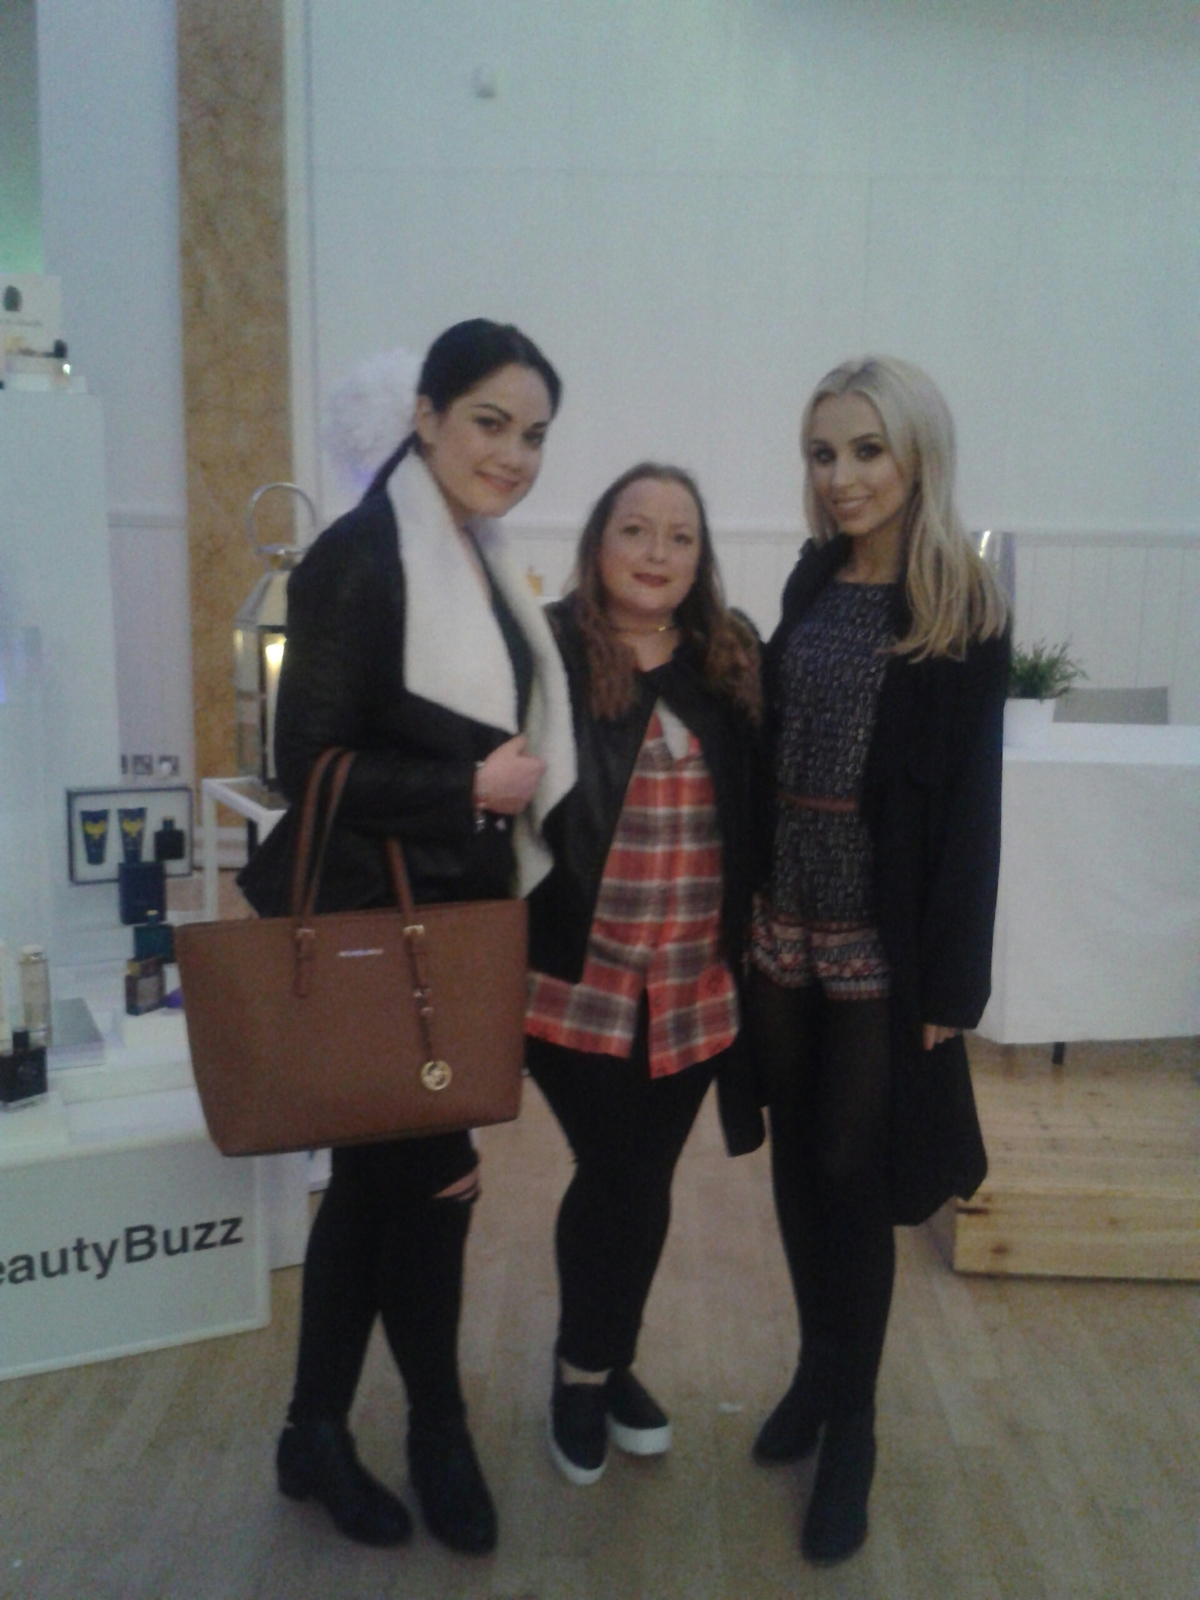 #DebsBeautyBuzz Debenhams Beauty Christmas Press Preview 2015 - Blogger and Beauty Writer Gail O'Connor with Bloggers Grace Mongey and Rosie Connolly